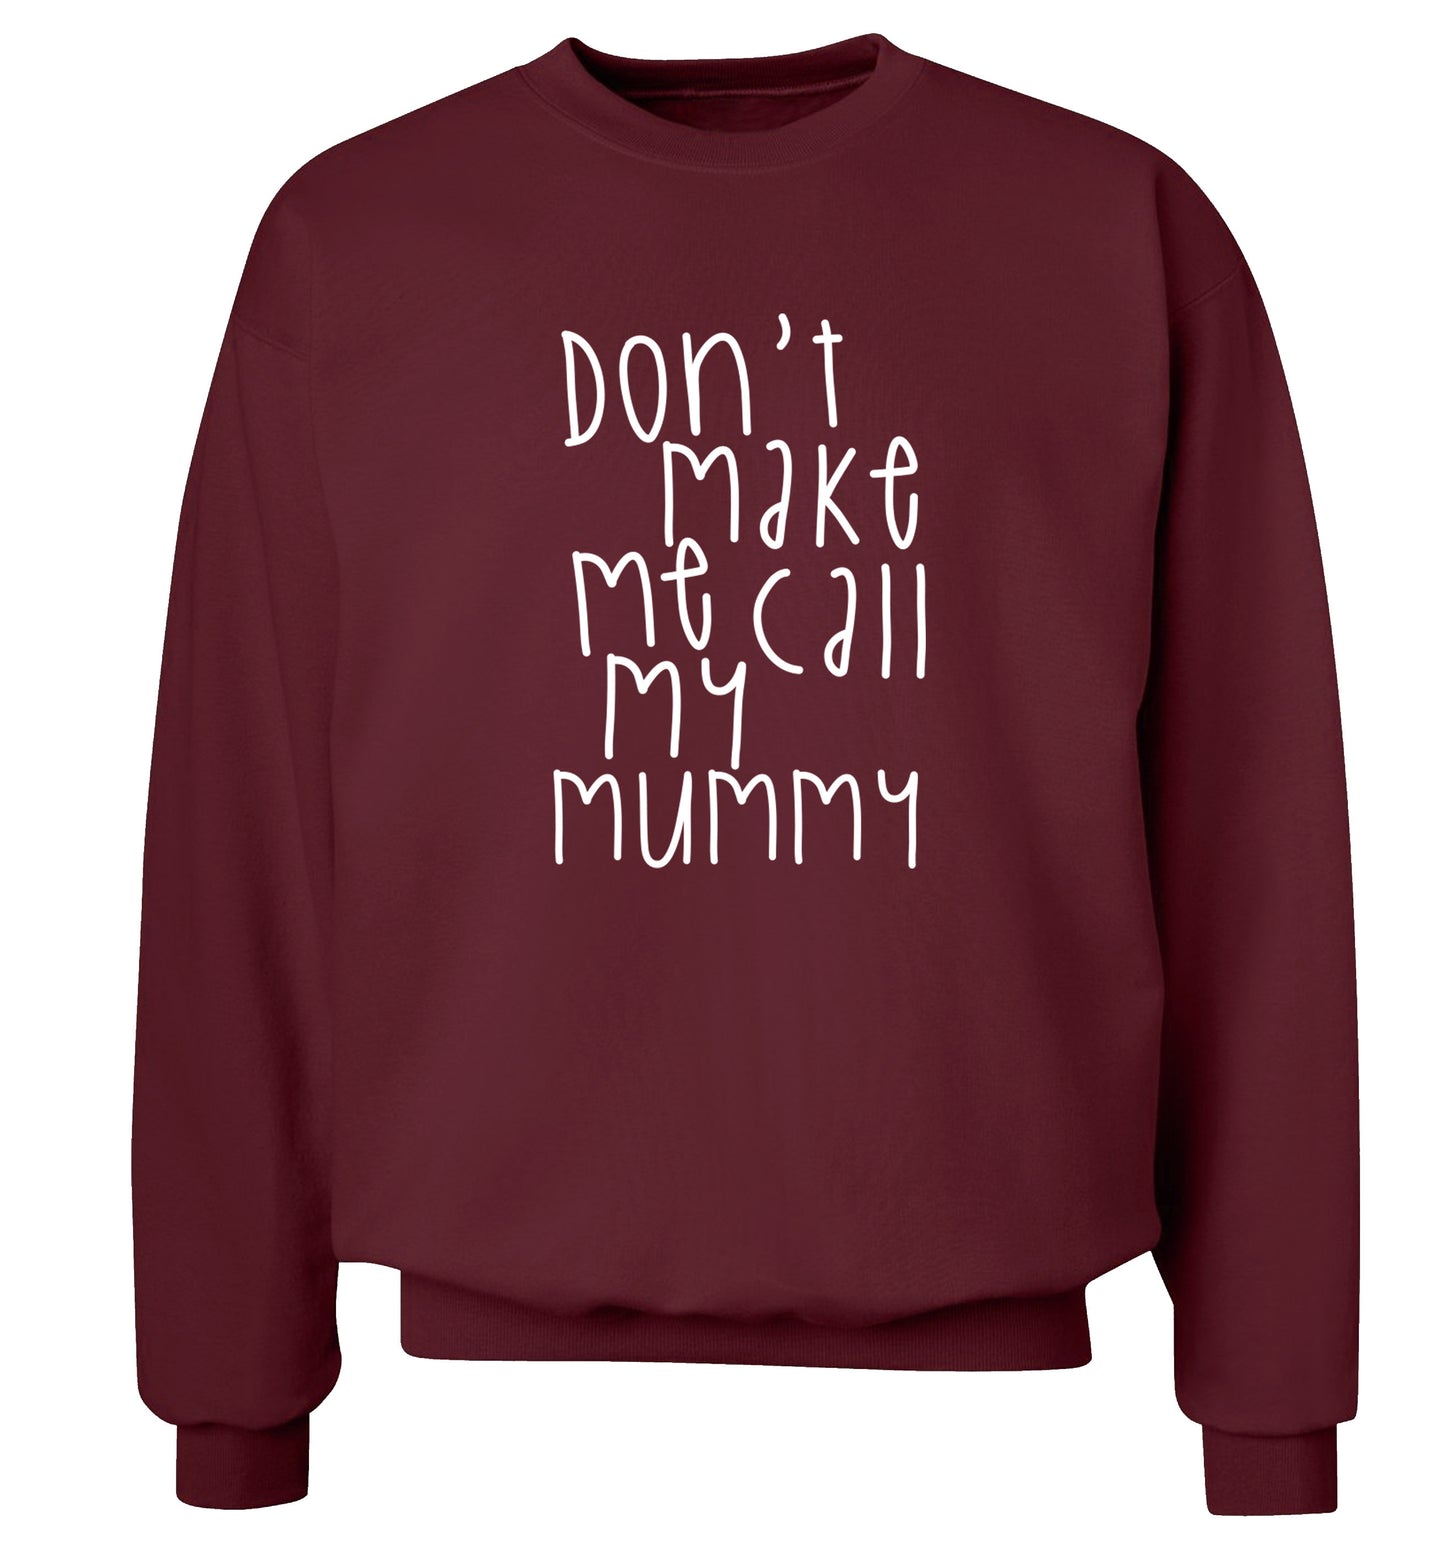 Don't make me call my mummy Adult's unisex maroon Sweater 2XL